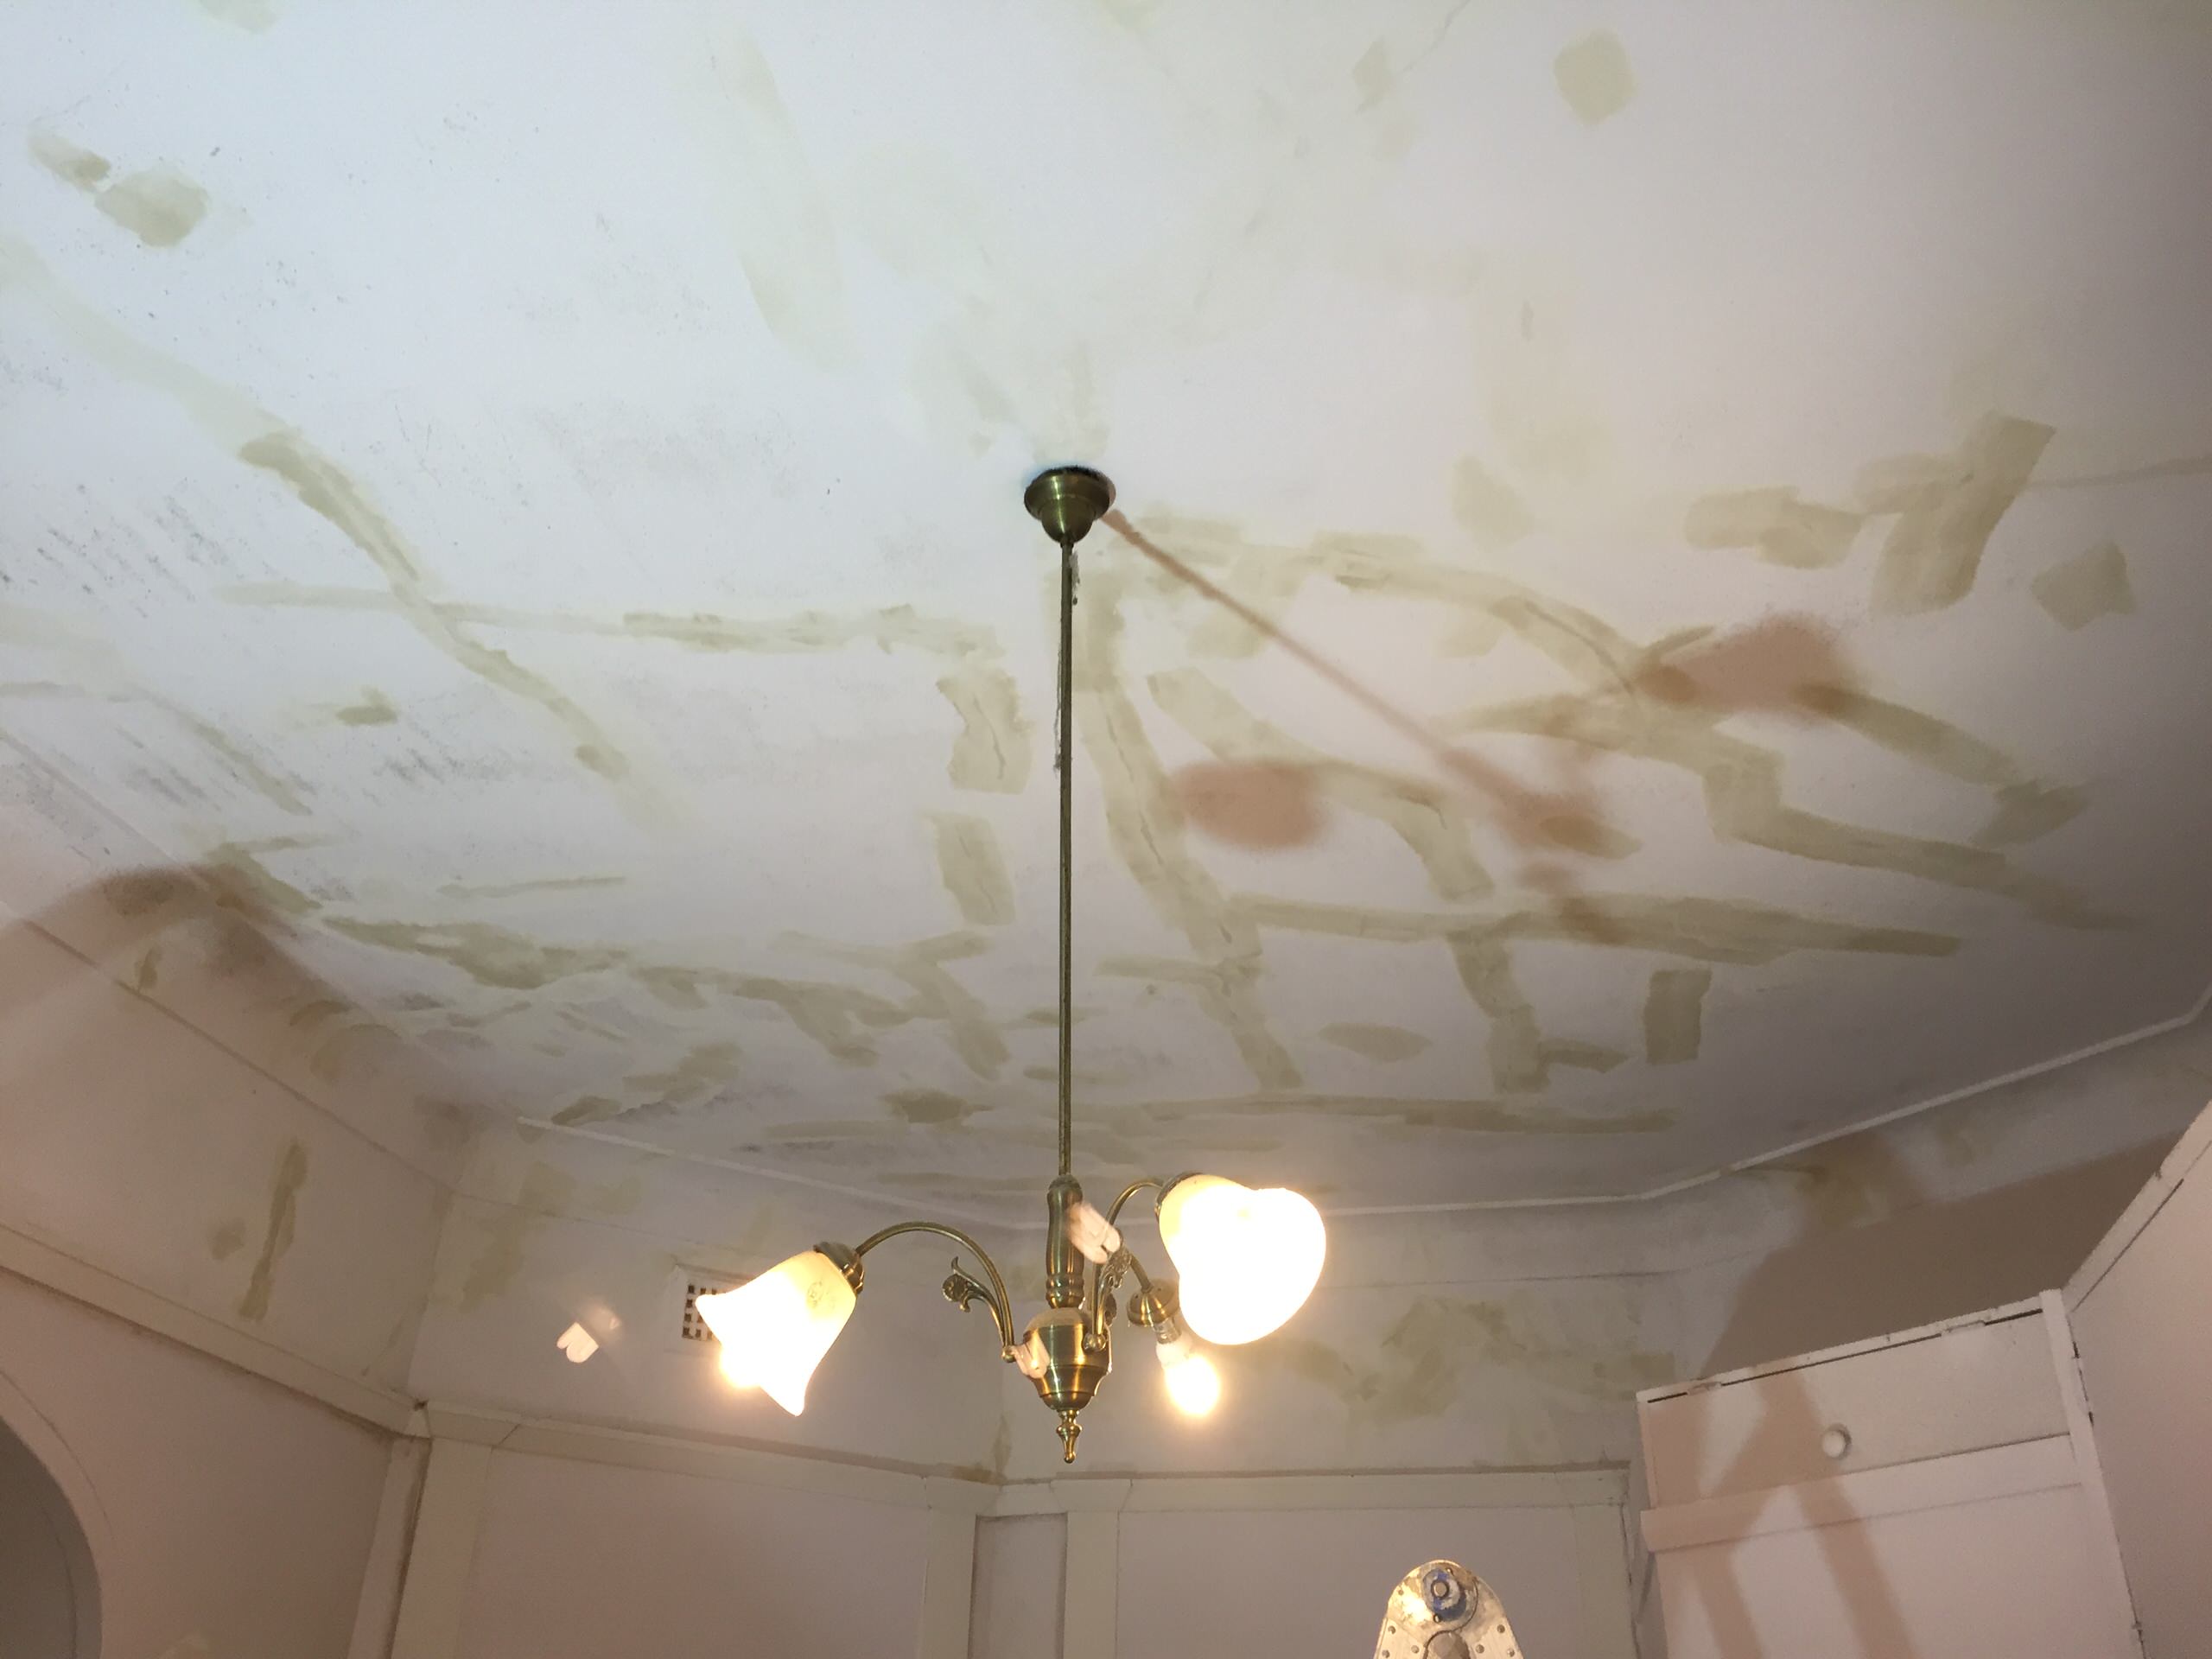 CEILING RESTORATION AND TIMBER IN ENAMEL